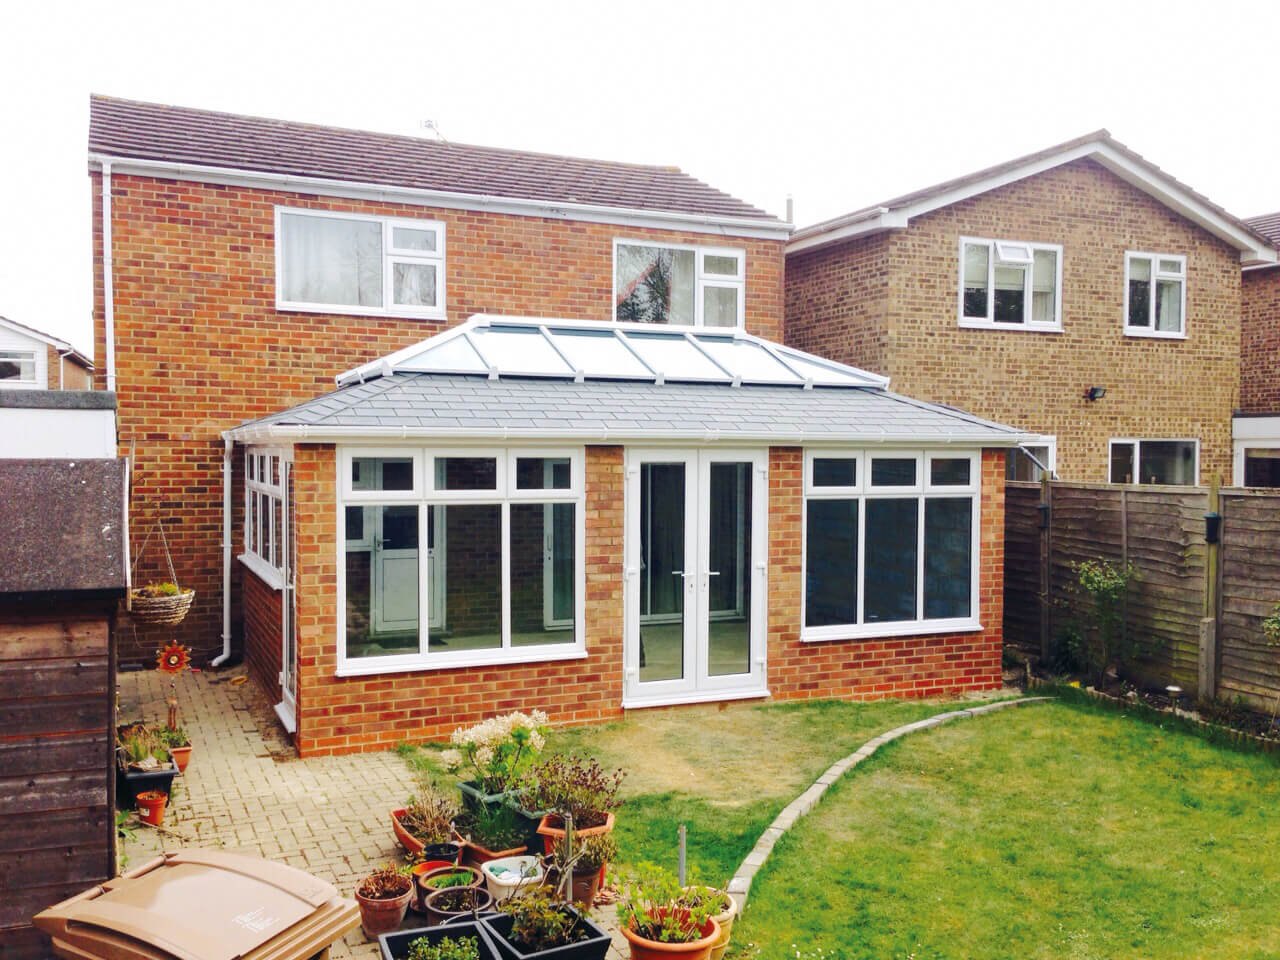 Case Study: Customer delighted with all-year-round orangery